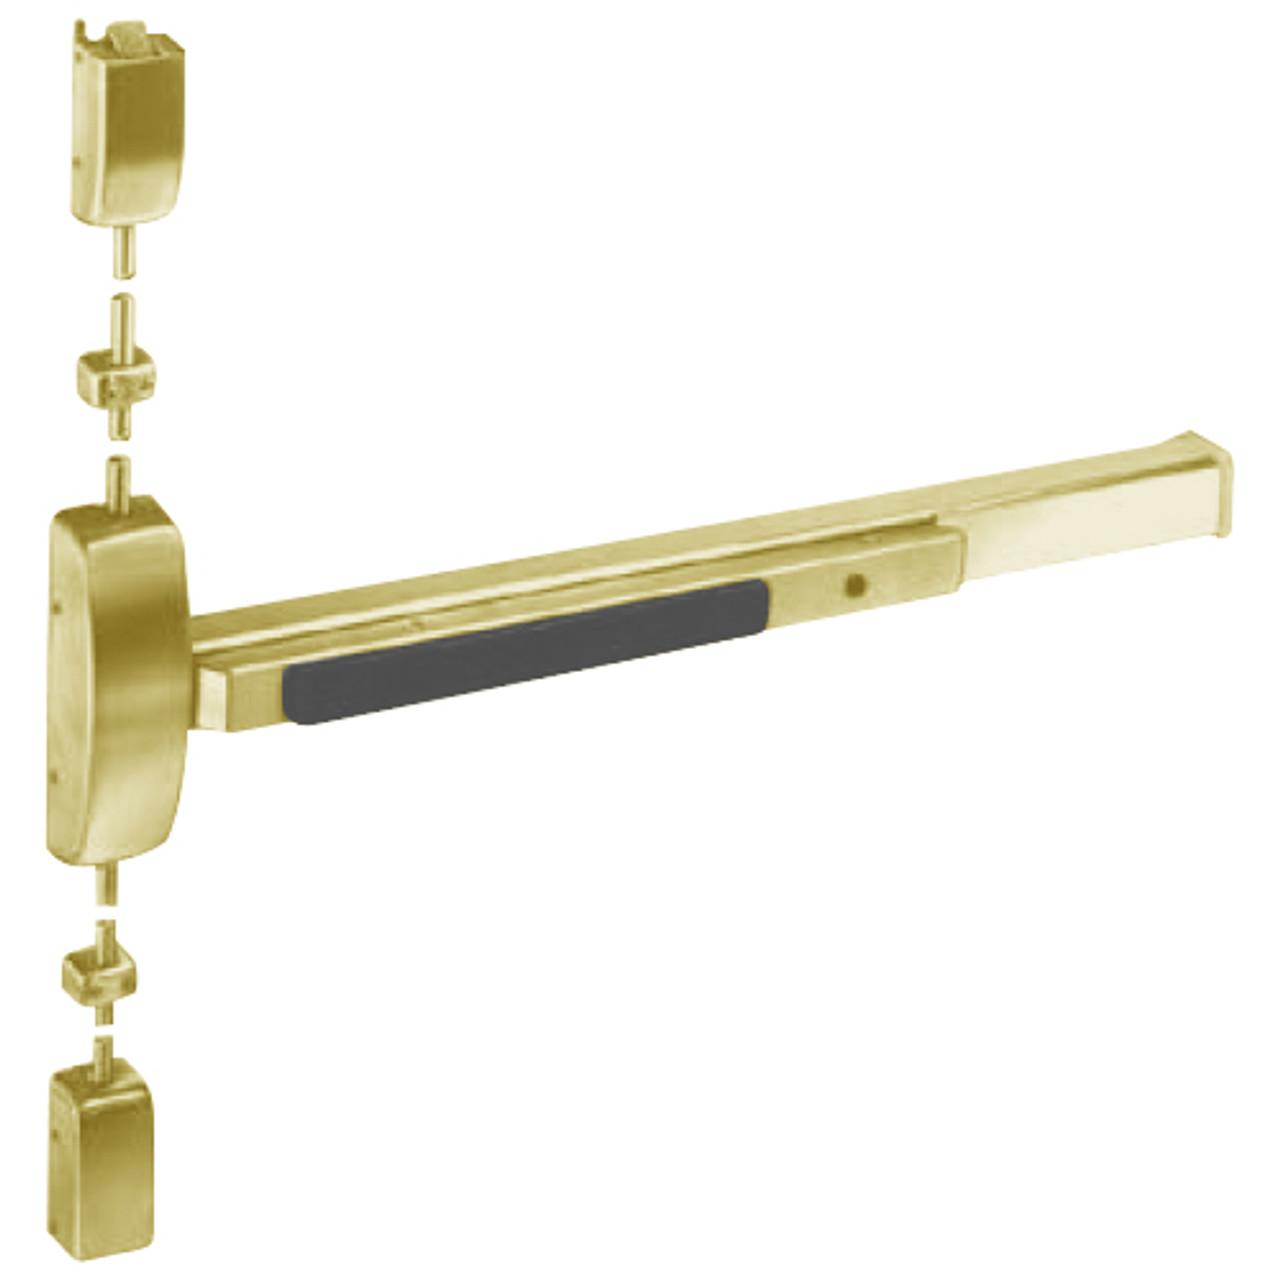 8710E-LHR-03 Sargent 80 Series Exit Only Surface Vertical Rod Exit Device in Bright Brass